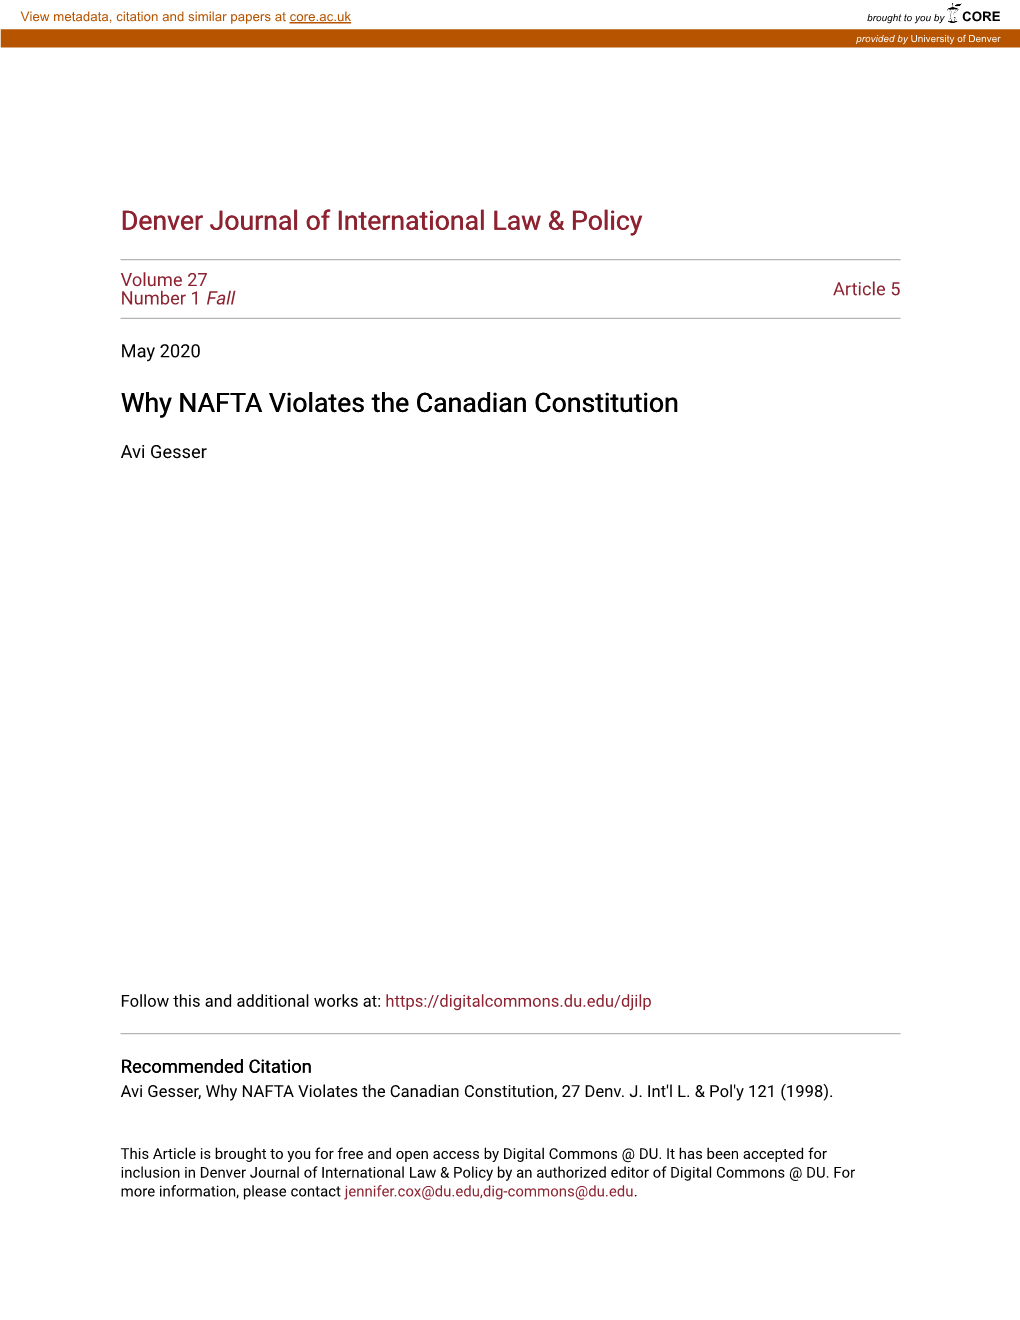 Why NAFTA Violates the Canadian Constitution